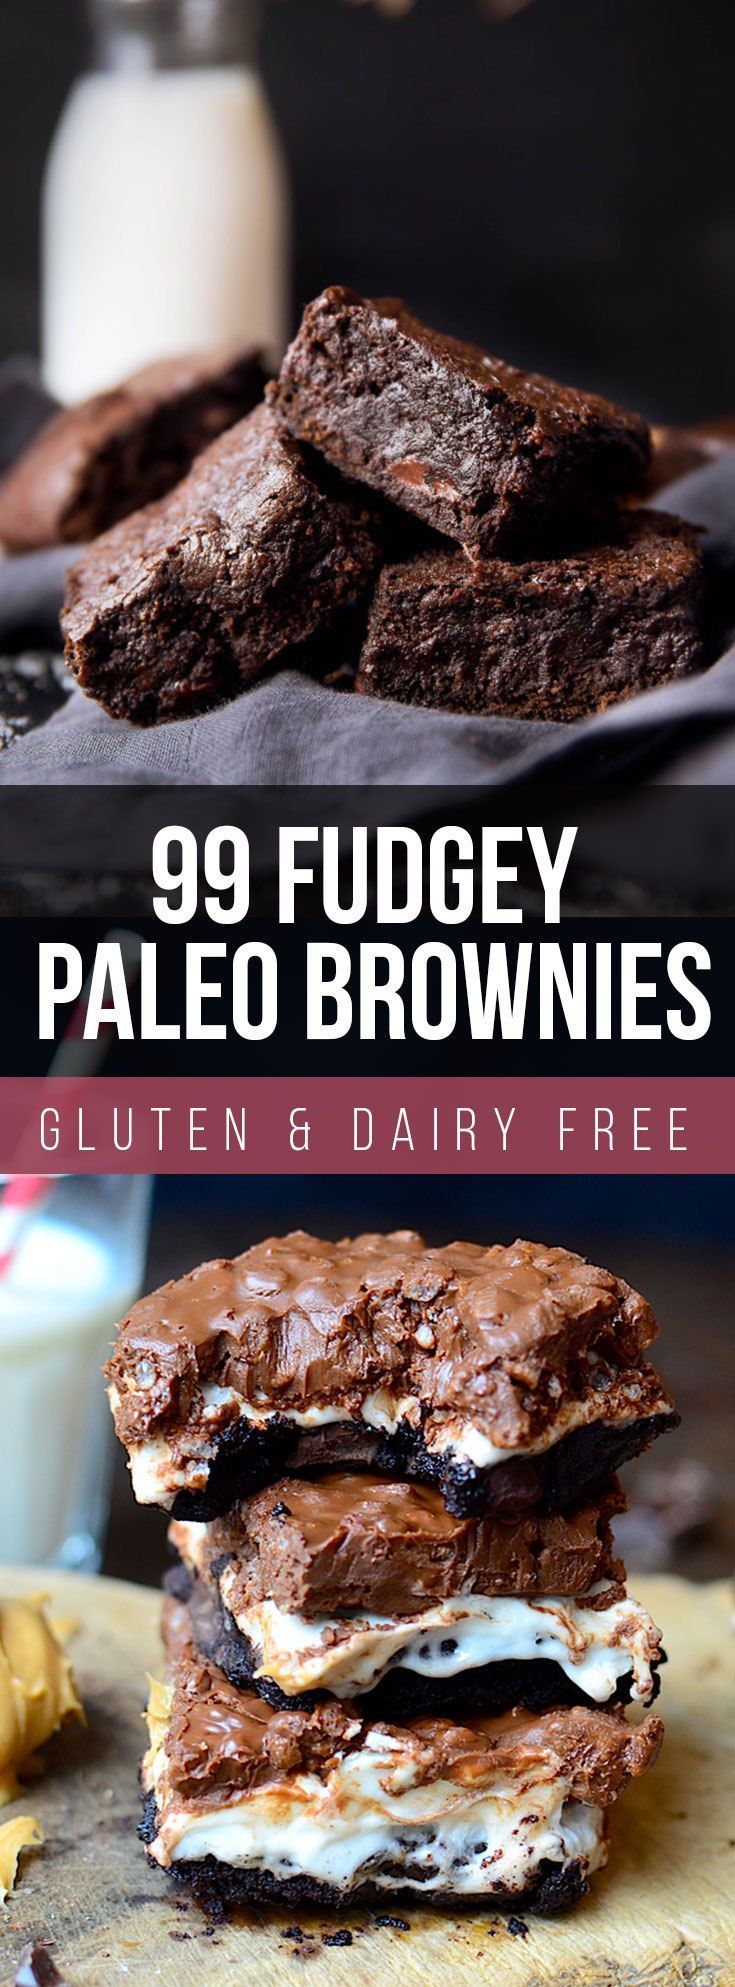 These 99 Fudgy Paleo Brownie Recipes are to die for. They are 100% Paleo and 100% delicious! Great for the family any time of the